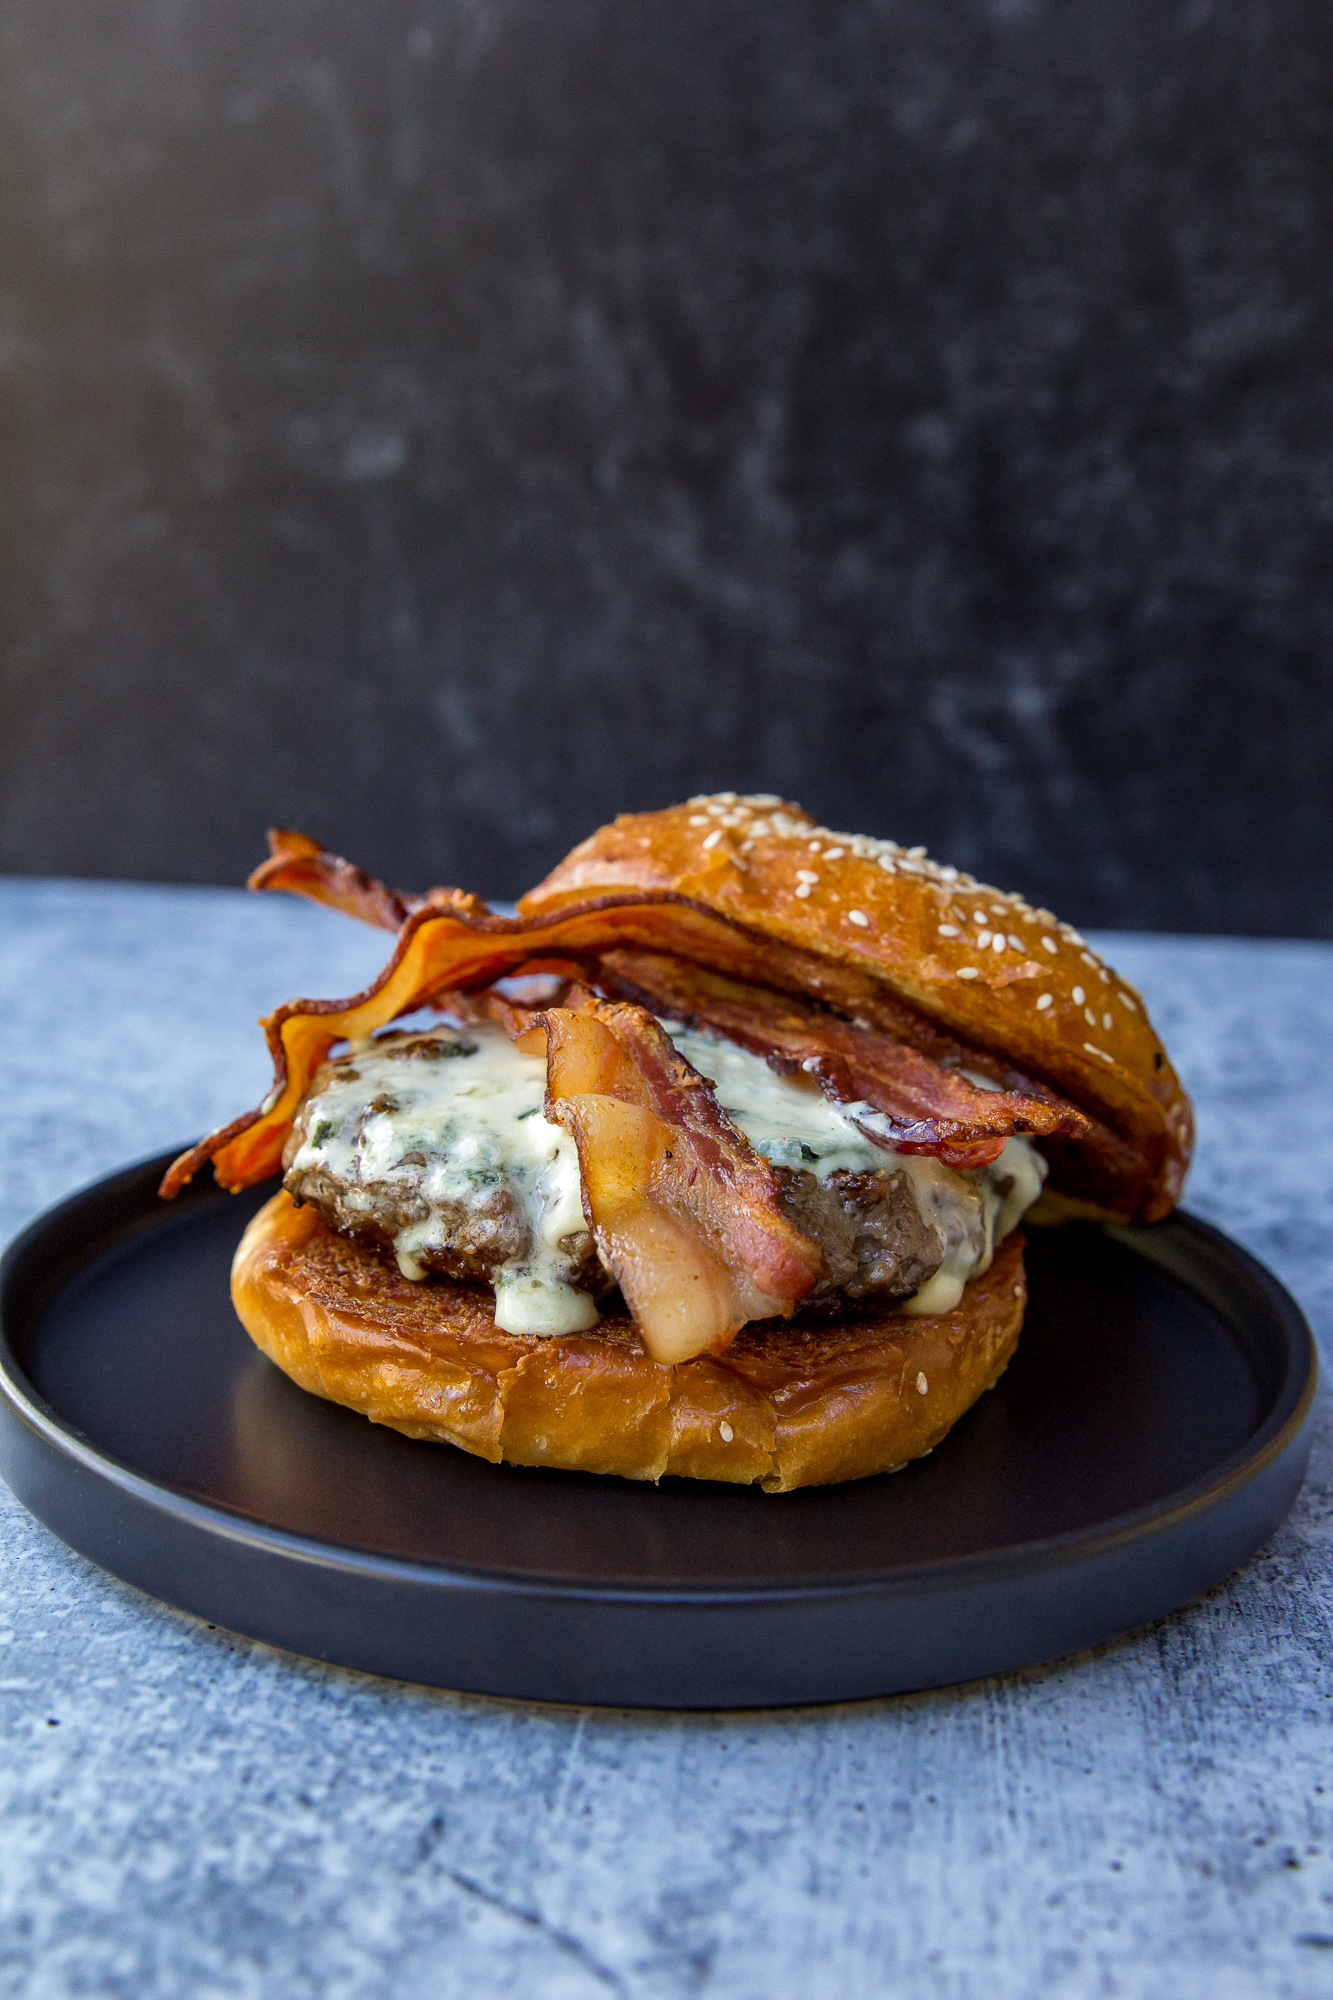 Level Up Your Burger Game with the Whataburger Bacon Blue Cheese